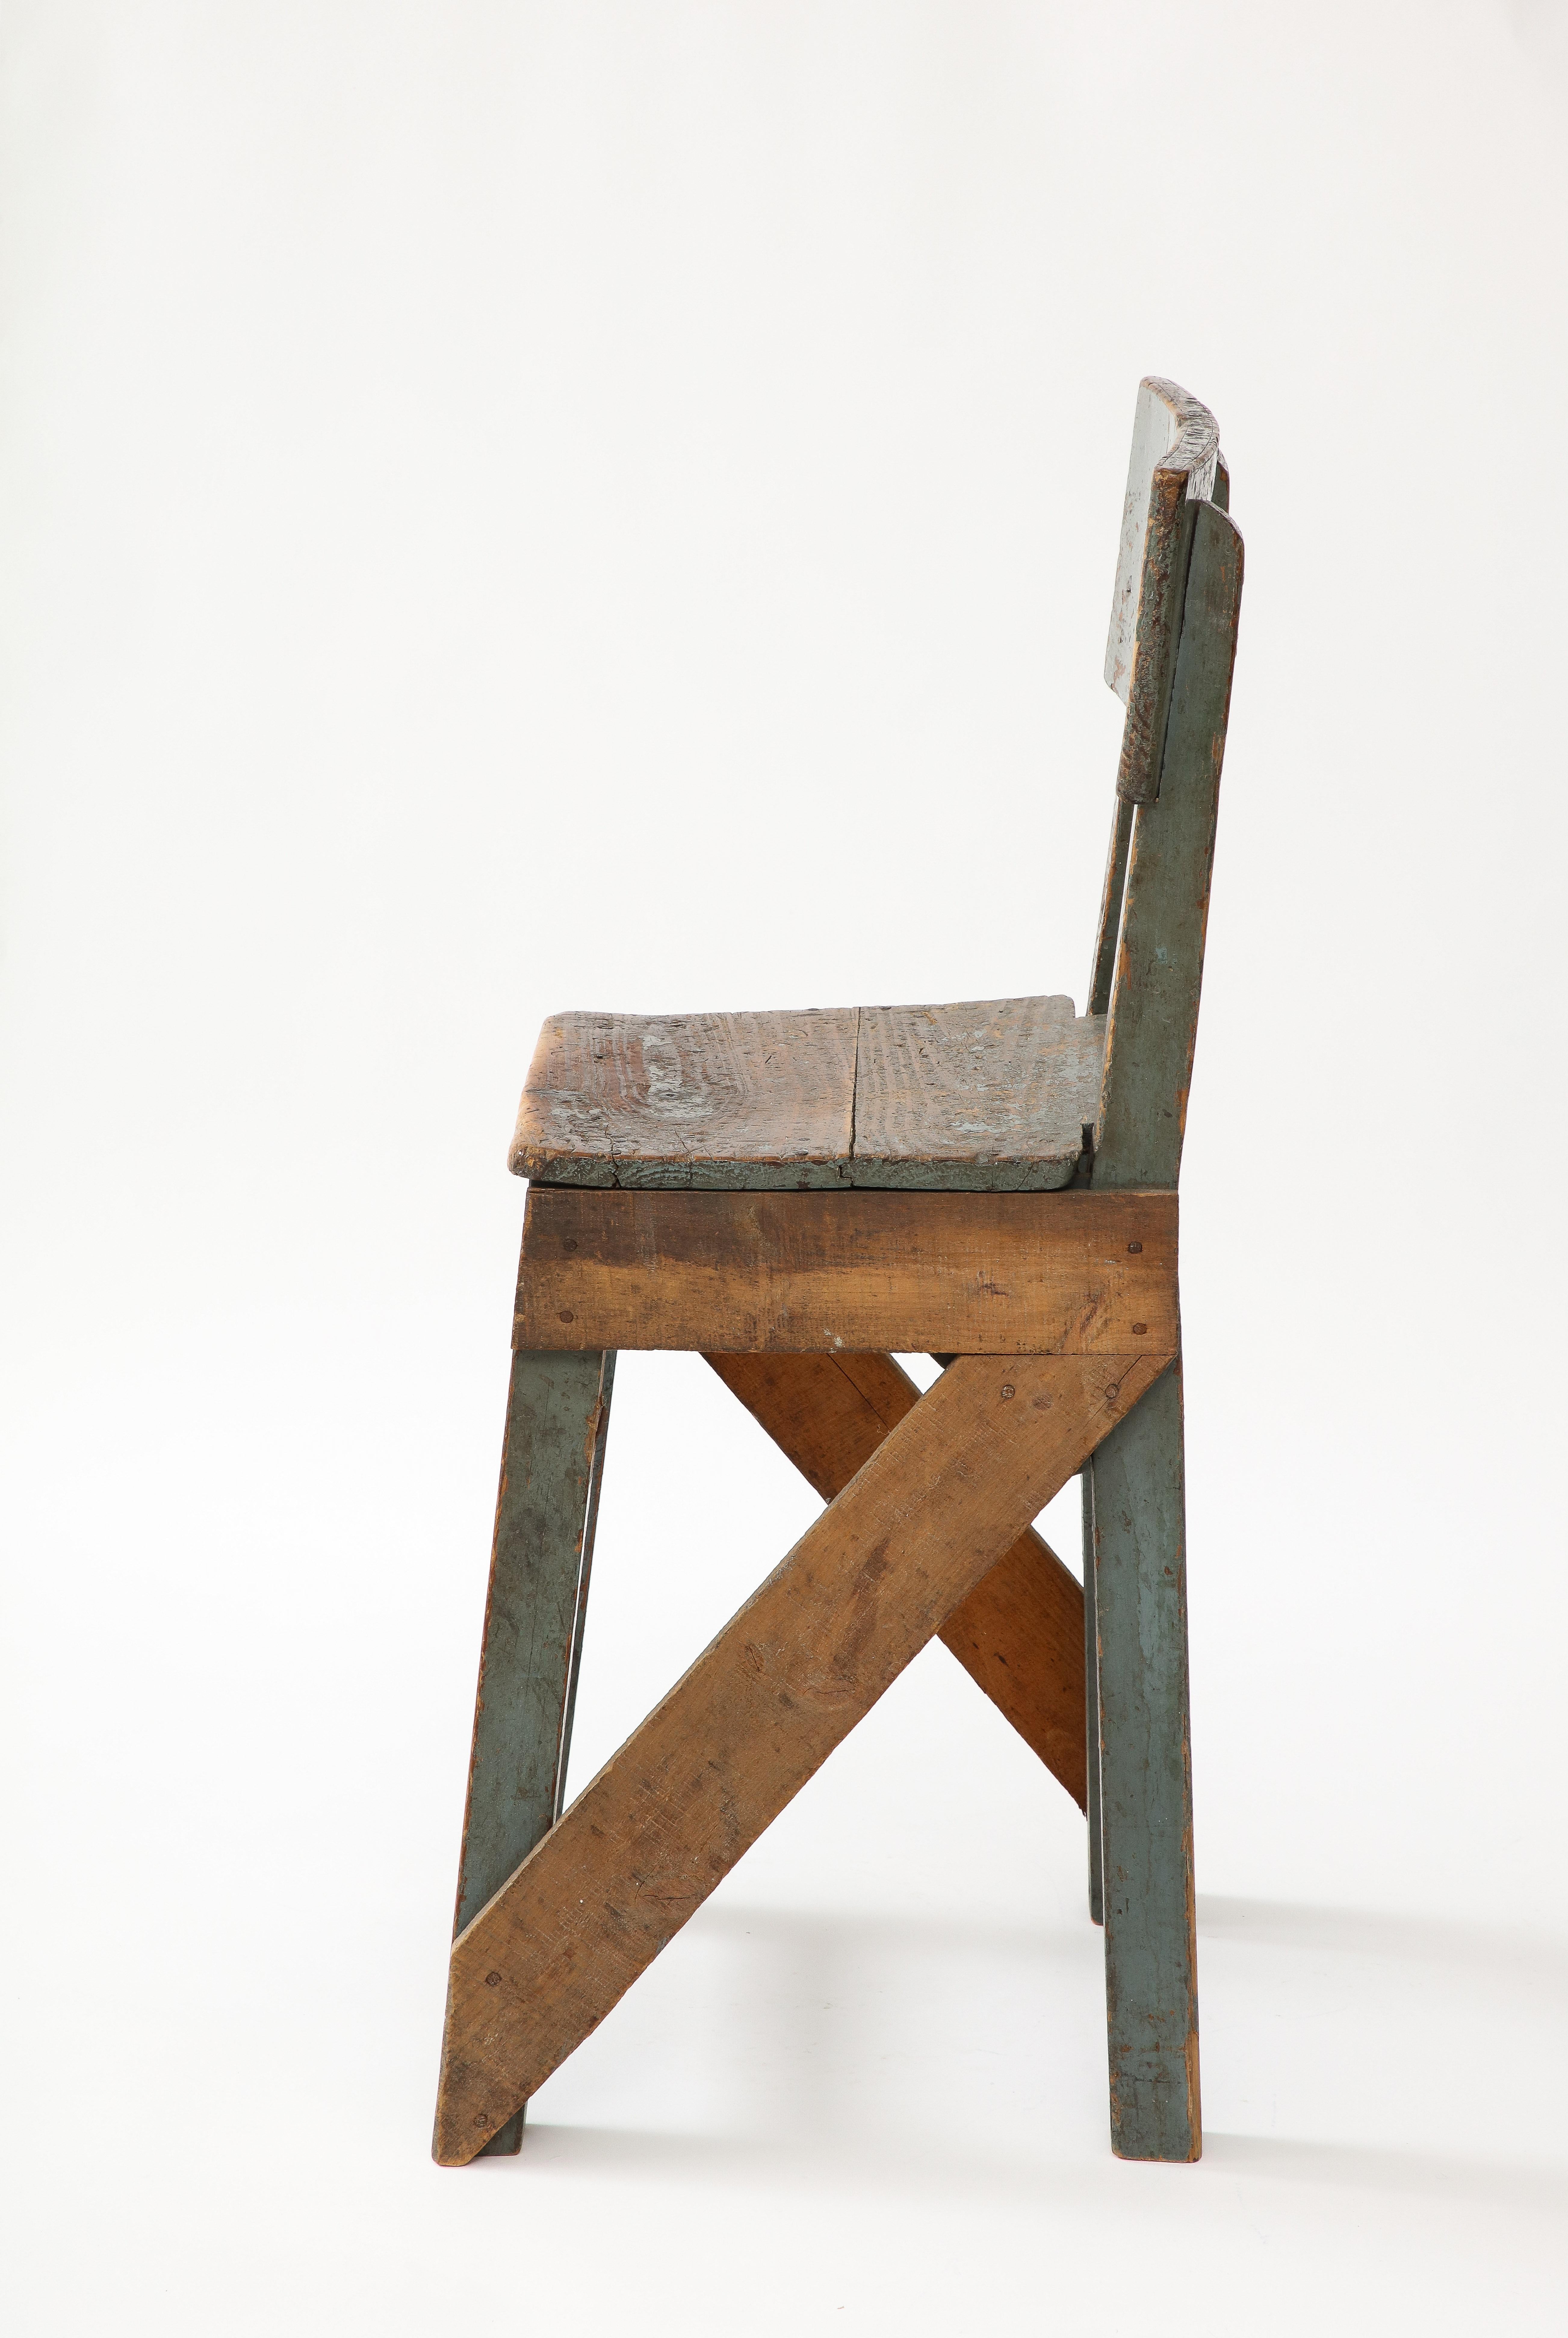 French Primitive Artist’s Chair, c. 1950 For Sale 1